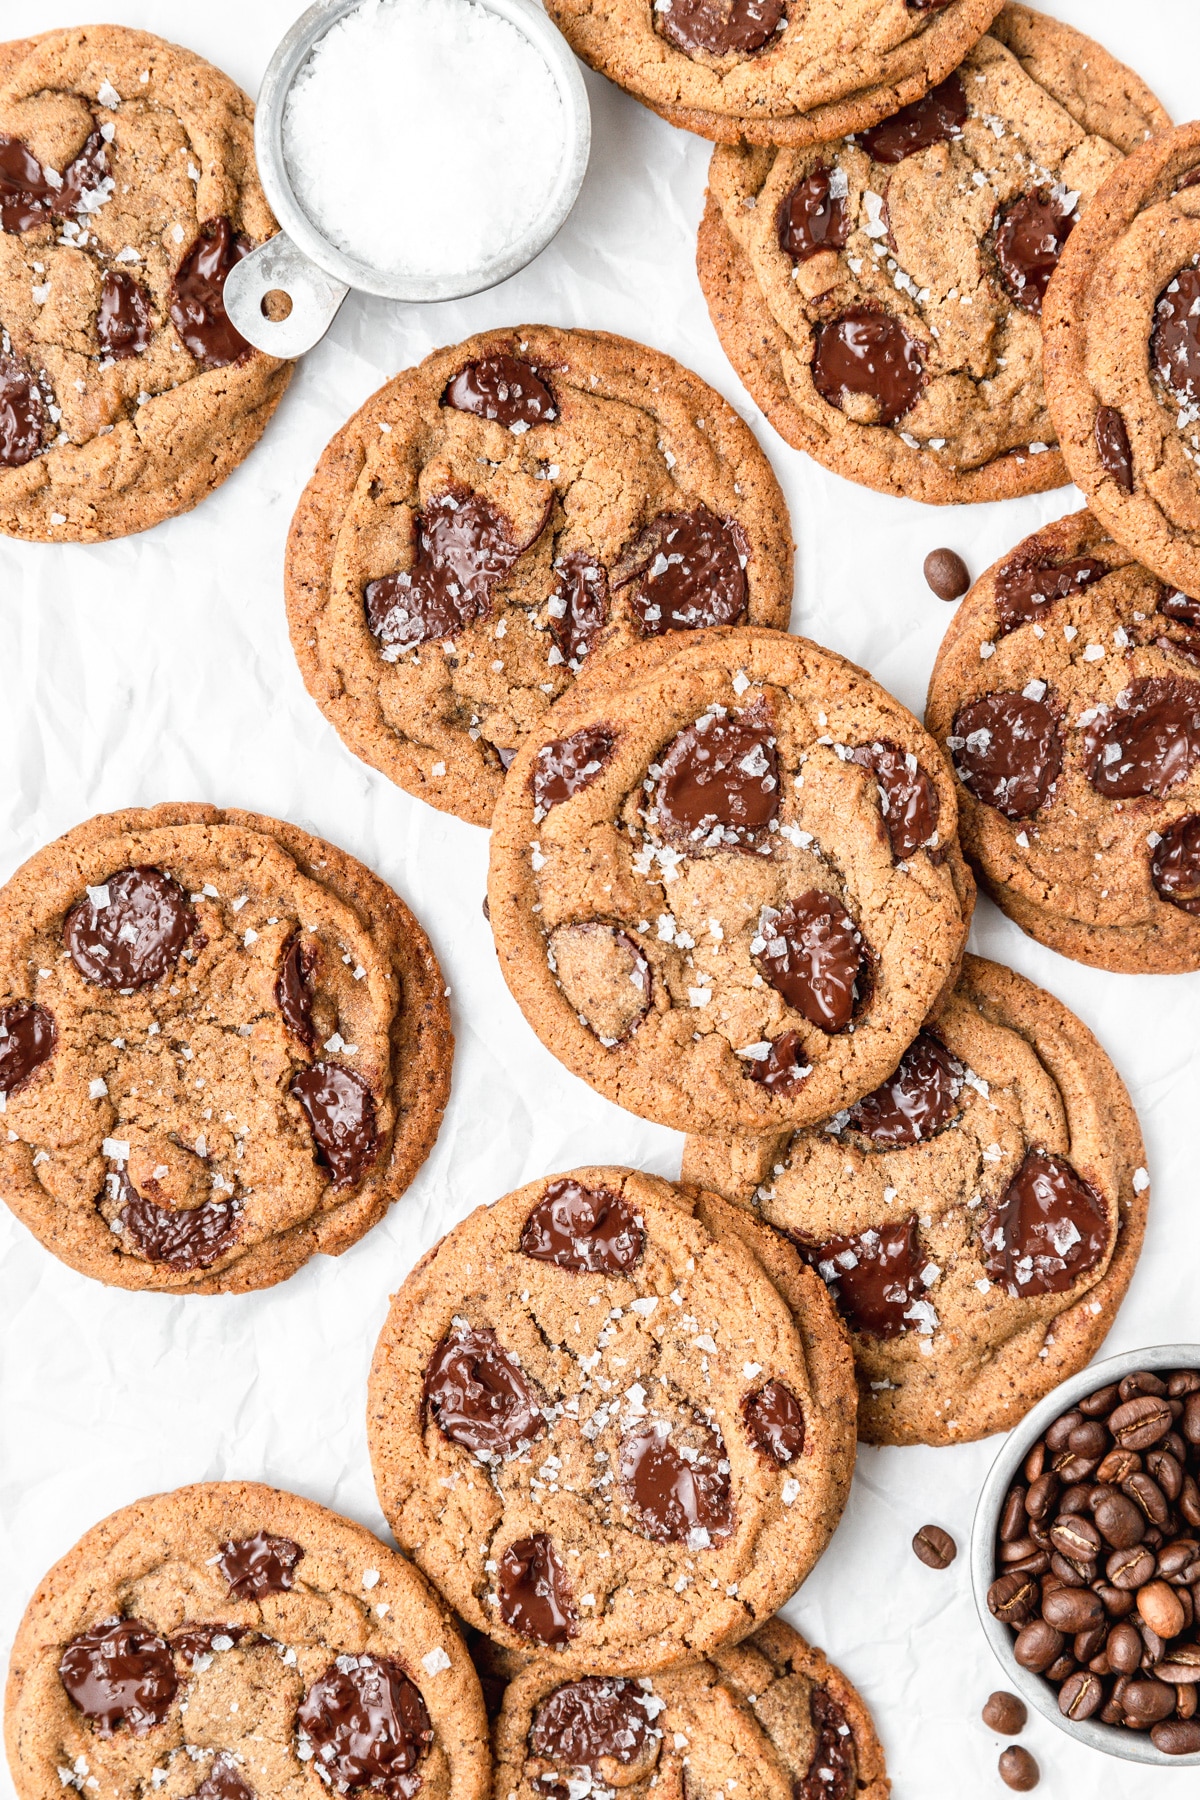 Brown Butter Espresso Chocolate Chip Cookies by Barley & Sage // FoodNouveau.com